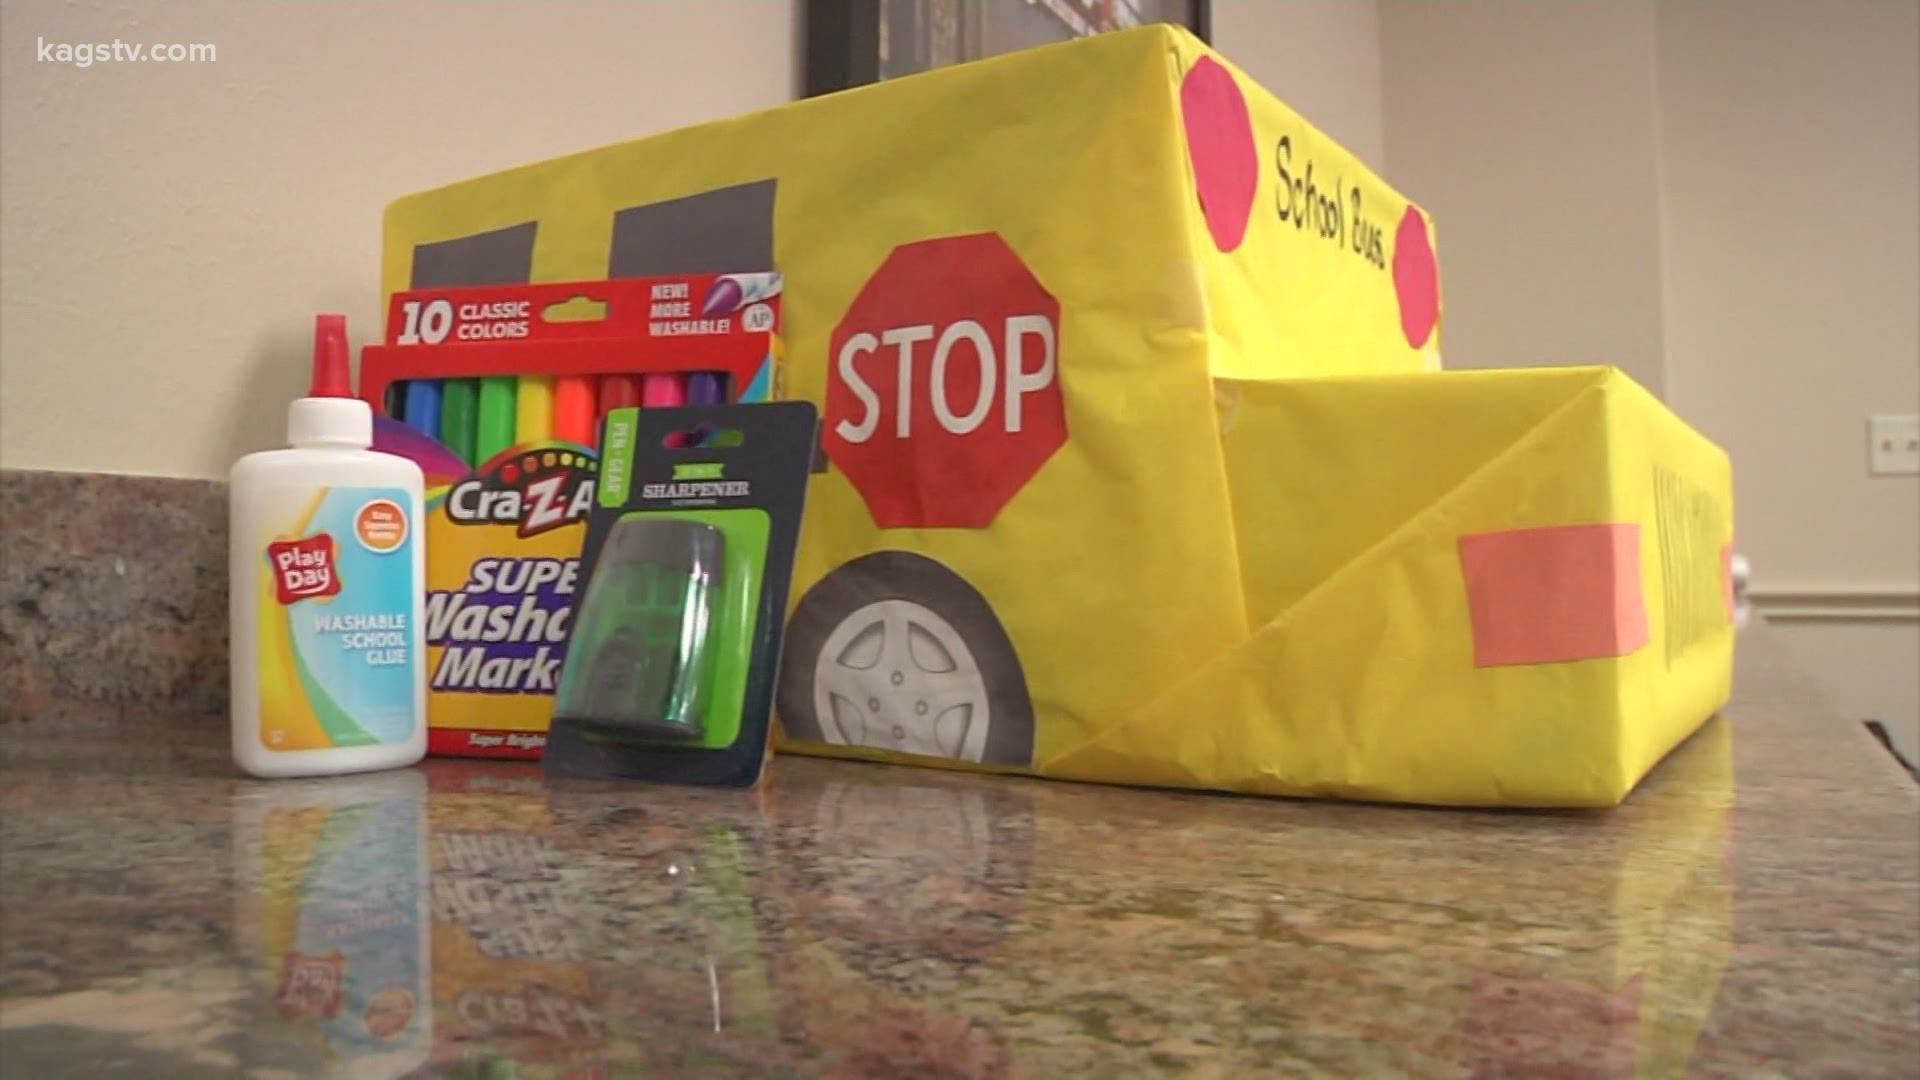 Bryan ISD receives 900 packaged school supplies from JLBCS "Stuff the Bus" campaign